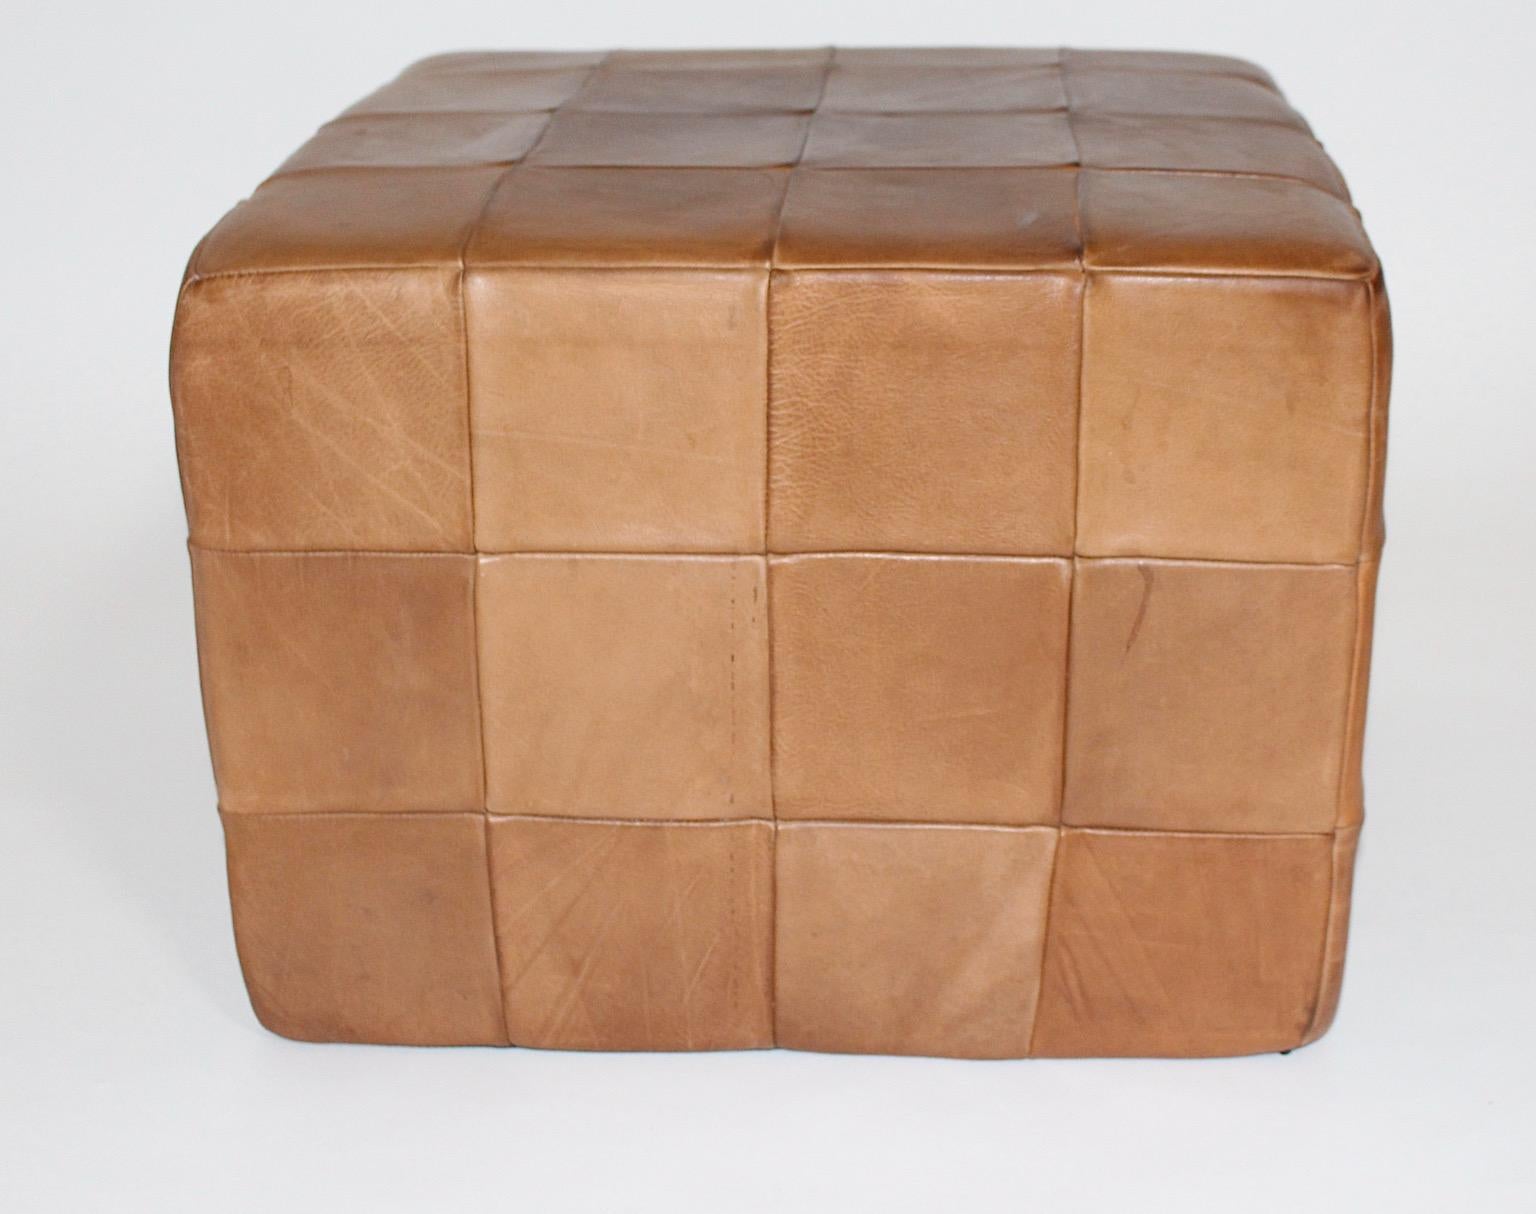 Modernist organic vintage leather stool or ottoman cubus like from stitched patchwork leather in cognac brown color tone by deSede 1970s Switzerland.
Throughout the different brown color shades this high quality vintage cubus stool is a stunning